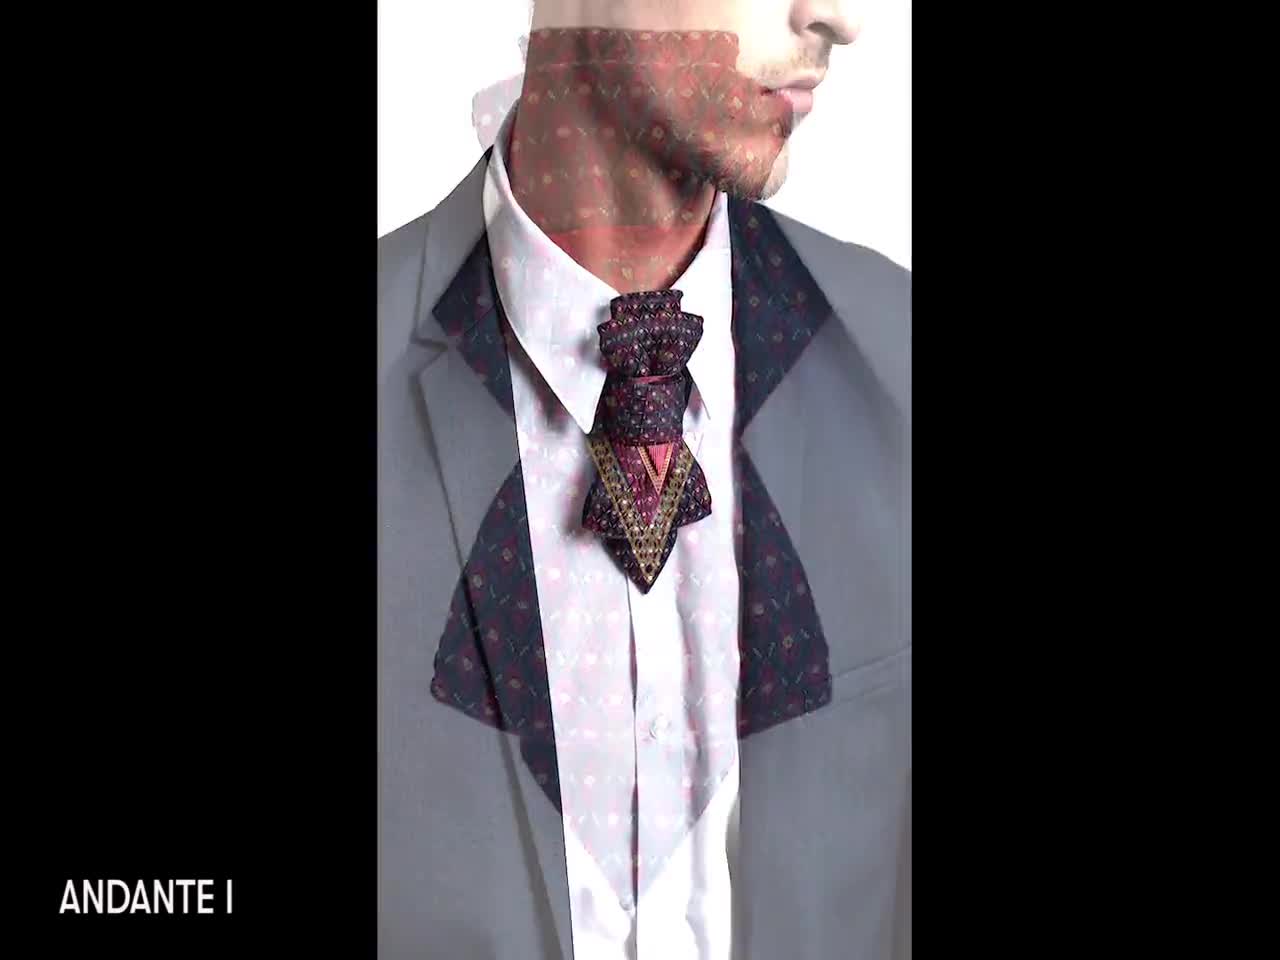 VERTICAL BOW TIE 'THE BLUE RHOMBUS